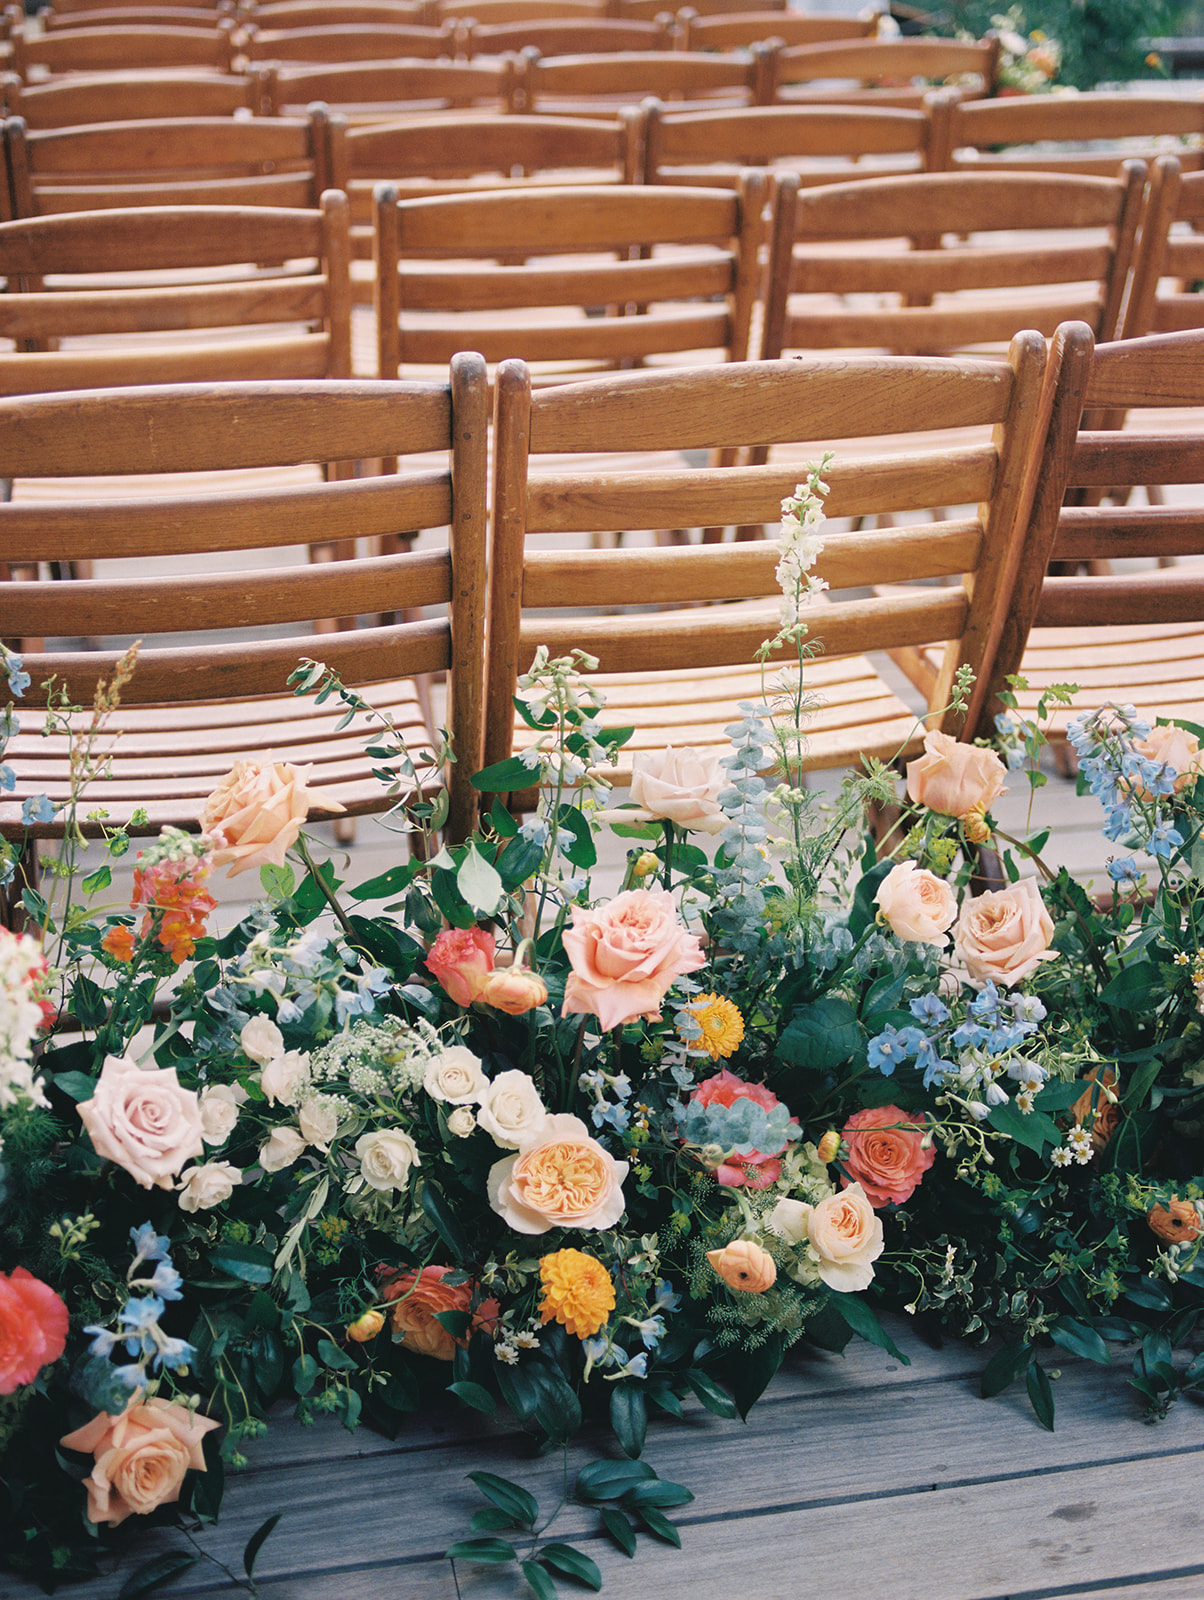 colorful wedding ceremony flowers lining the aisle for a summer wedding at stein eriksen lodge in park city utah